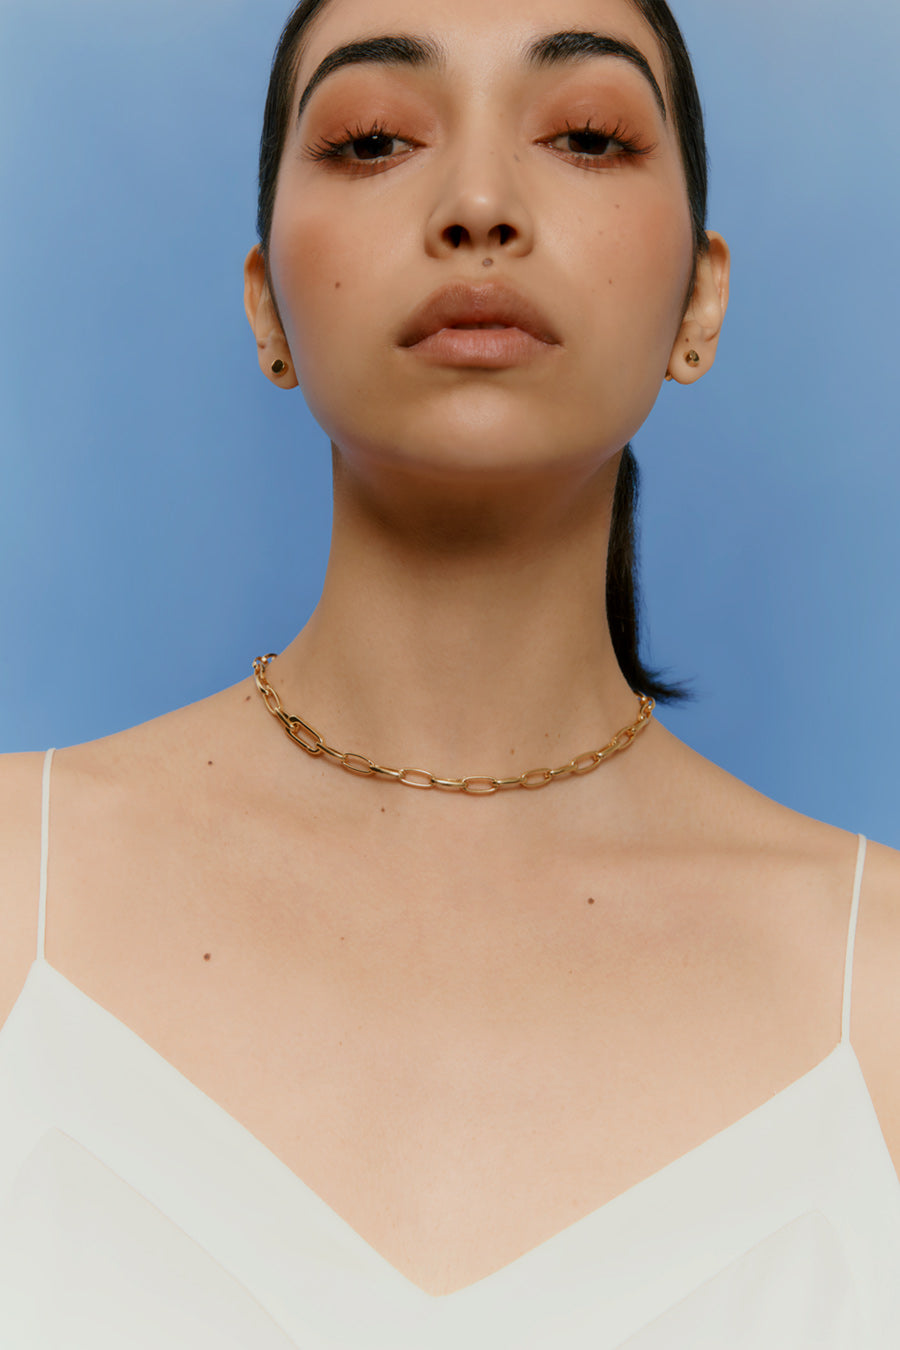 Close-up portrait of a woman wearing a necklace, looking upwards.